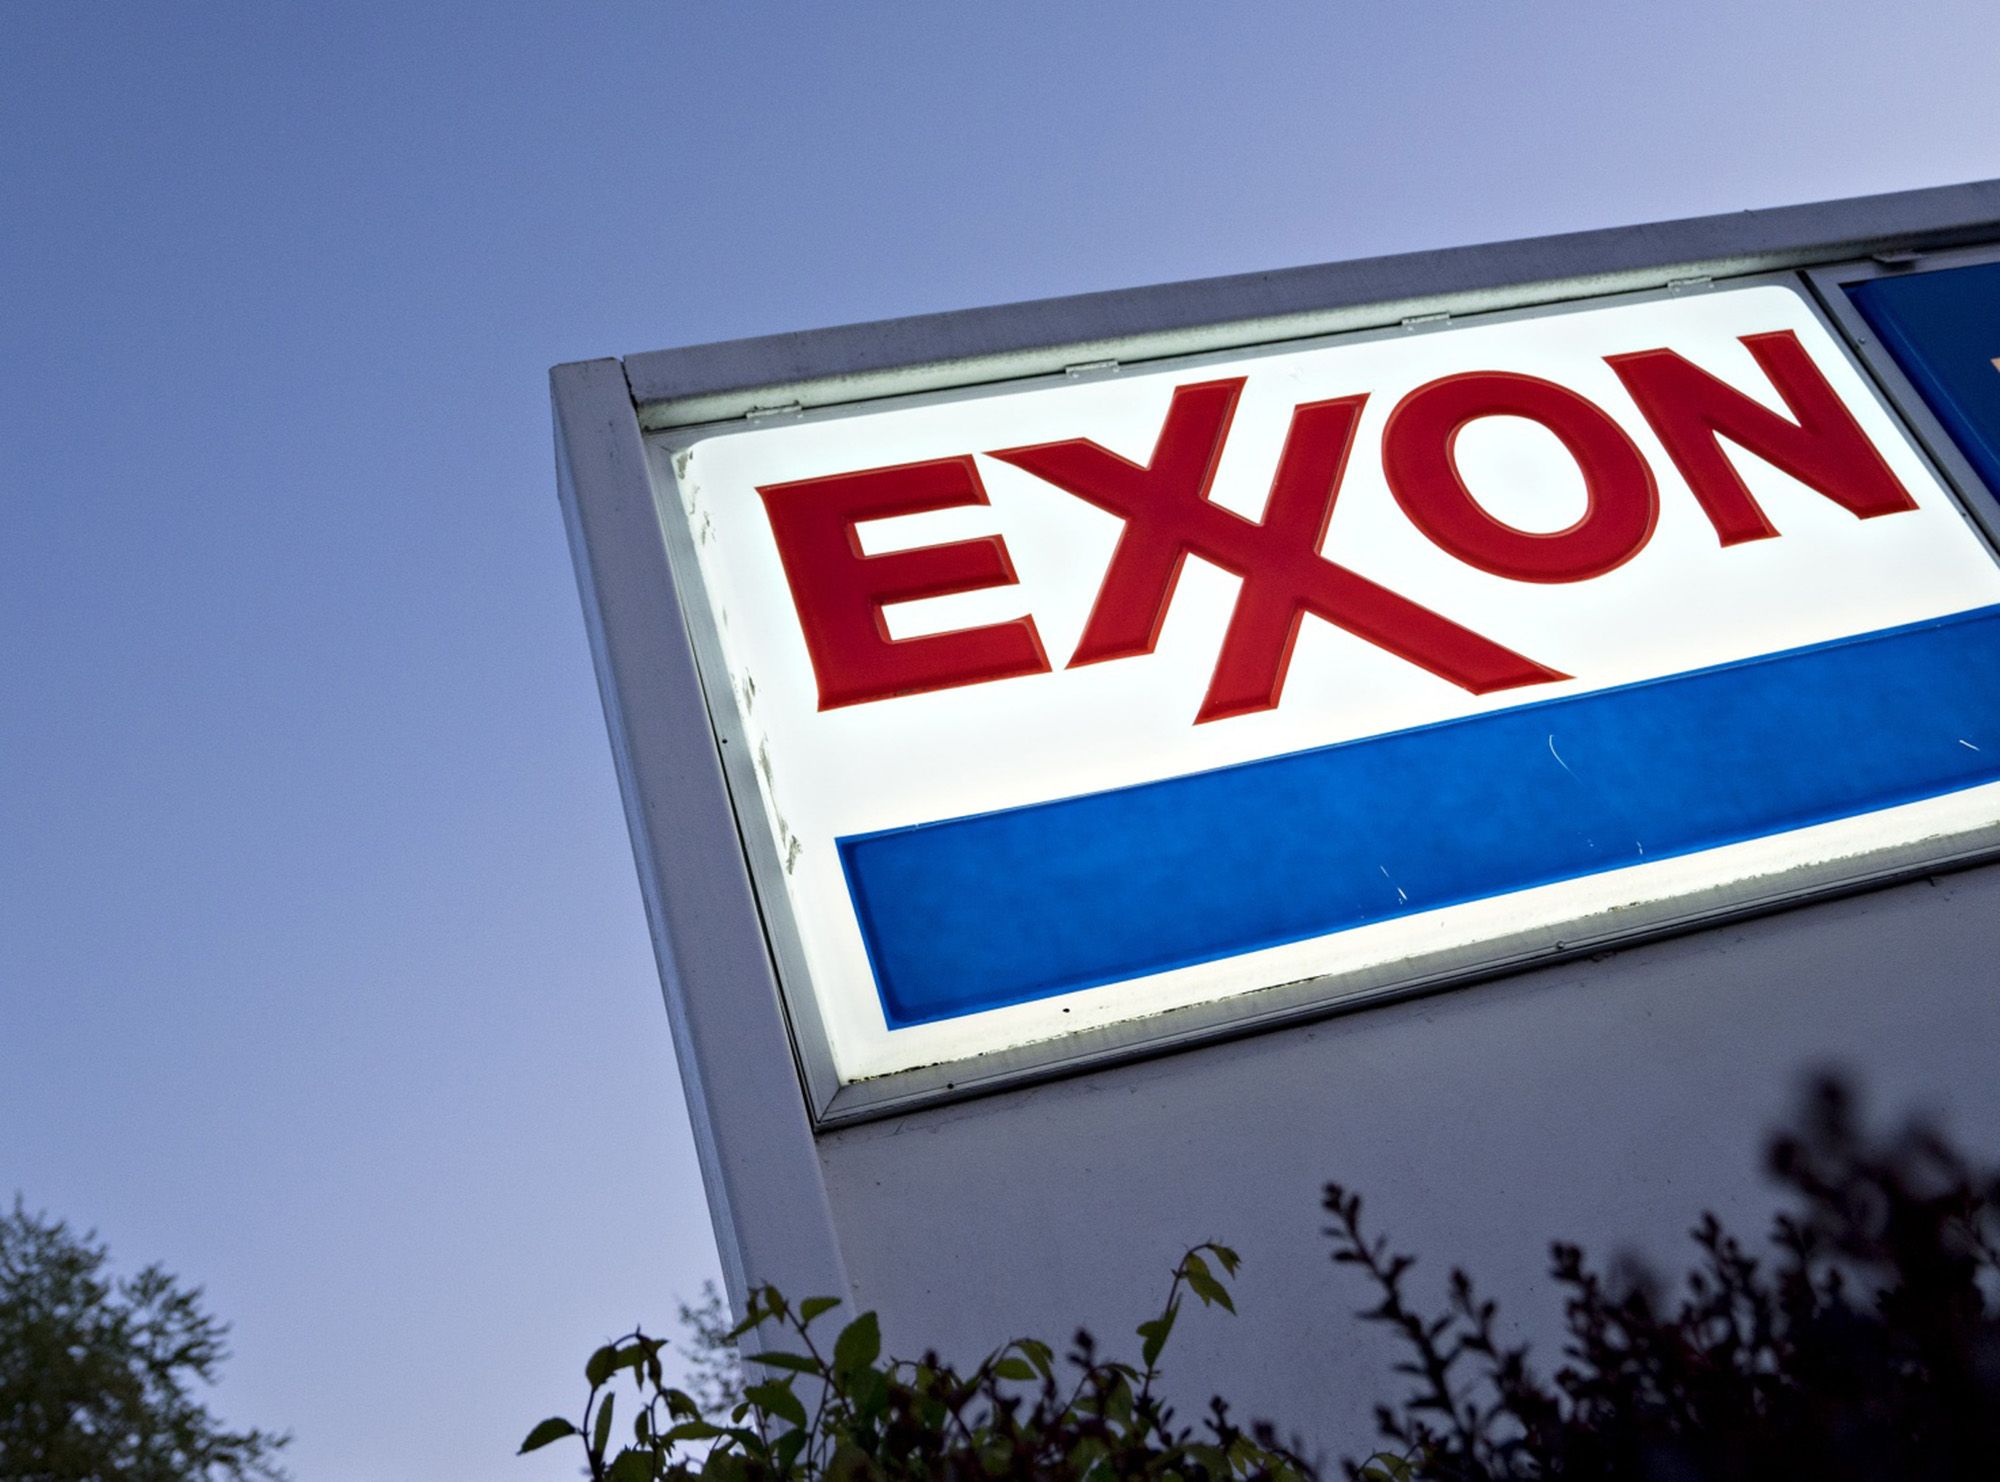 Exxon’s $59 Billion Profit Clouded by Buybacks Disappoinment